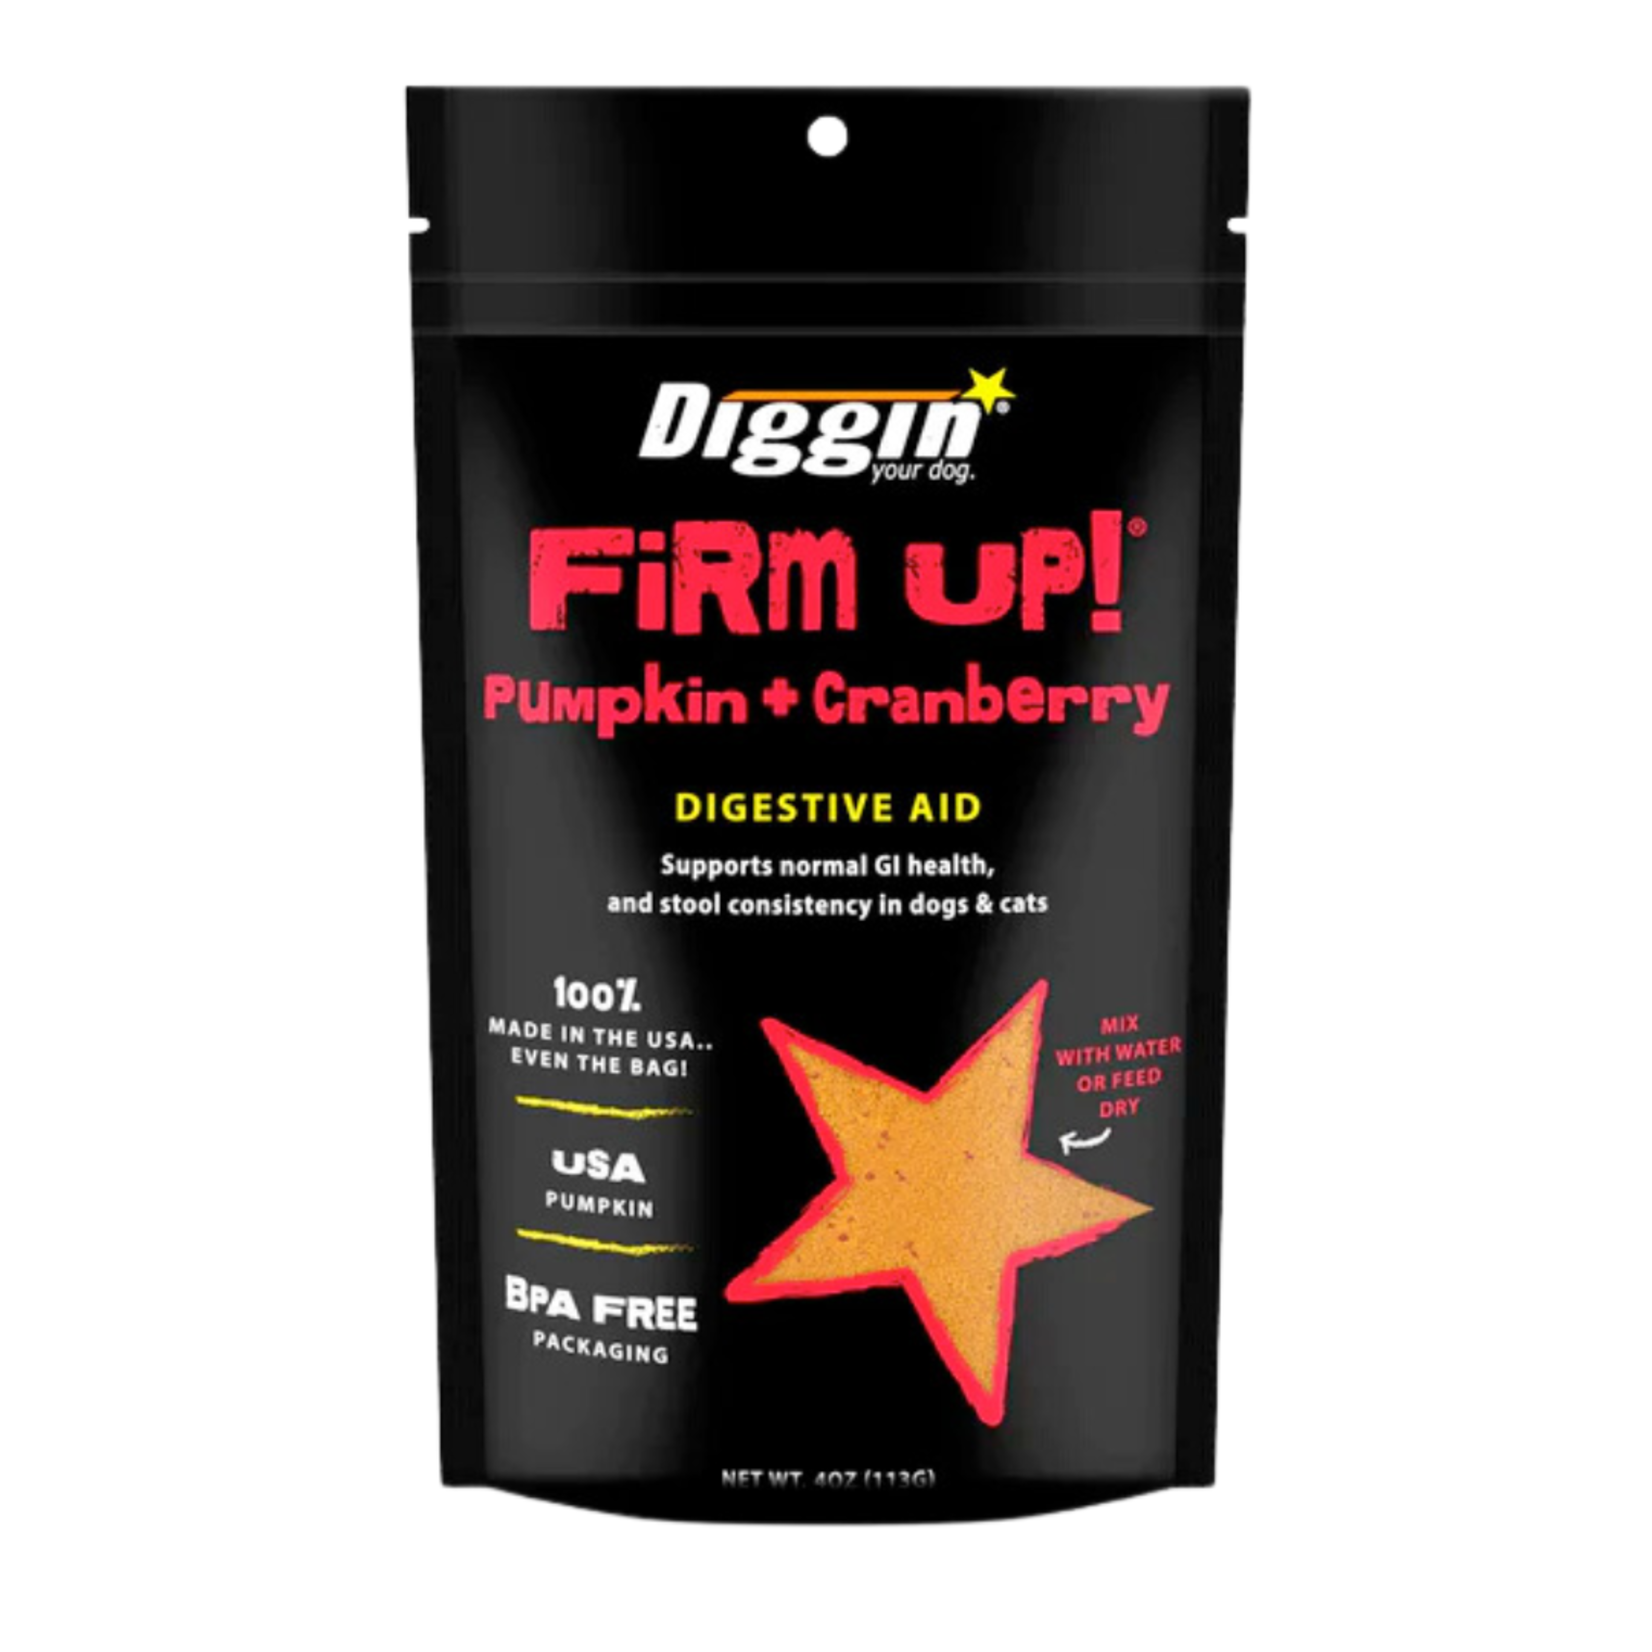 Diggin' Your Dog 4 oz. - Firm Up! - Pumpkin + Cranberry Supplement for Dogs & Cats - Diggin' Your Dog